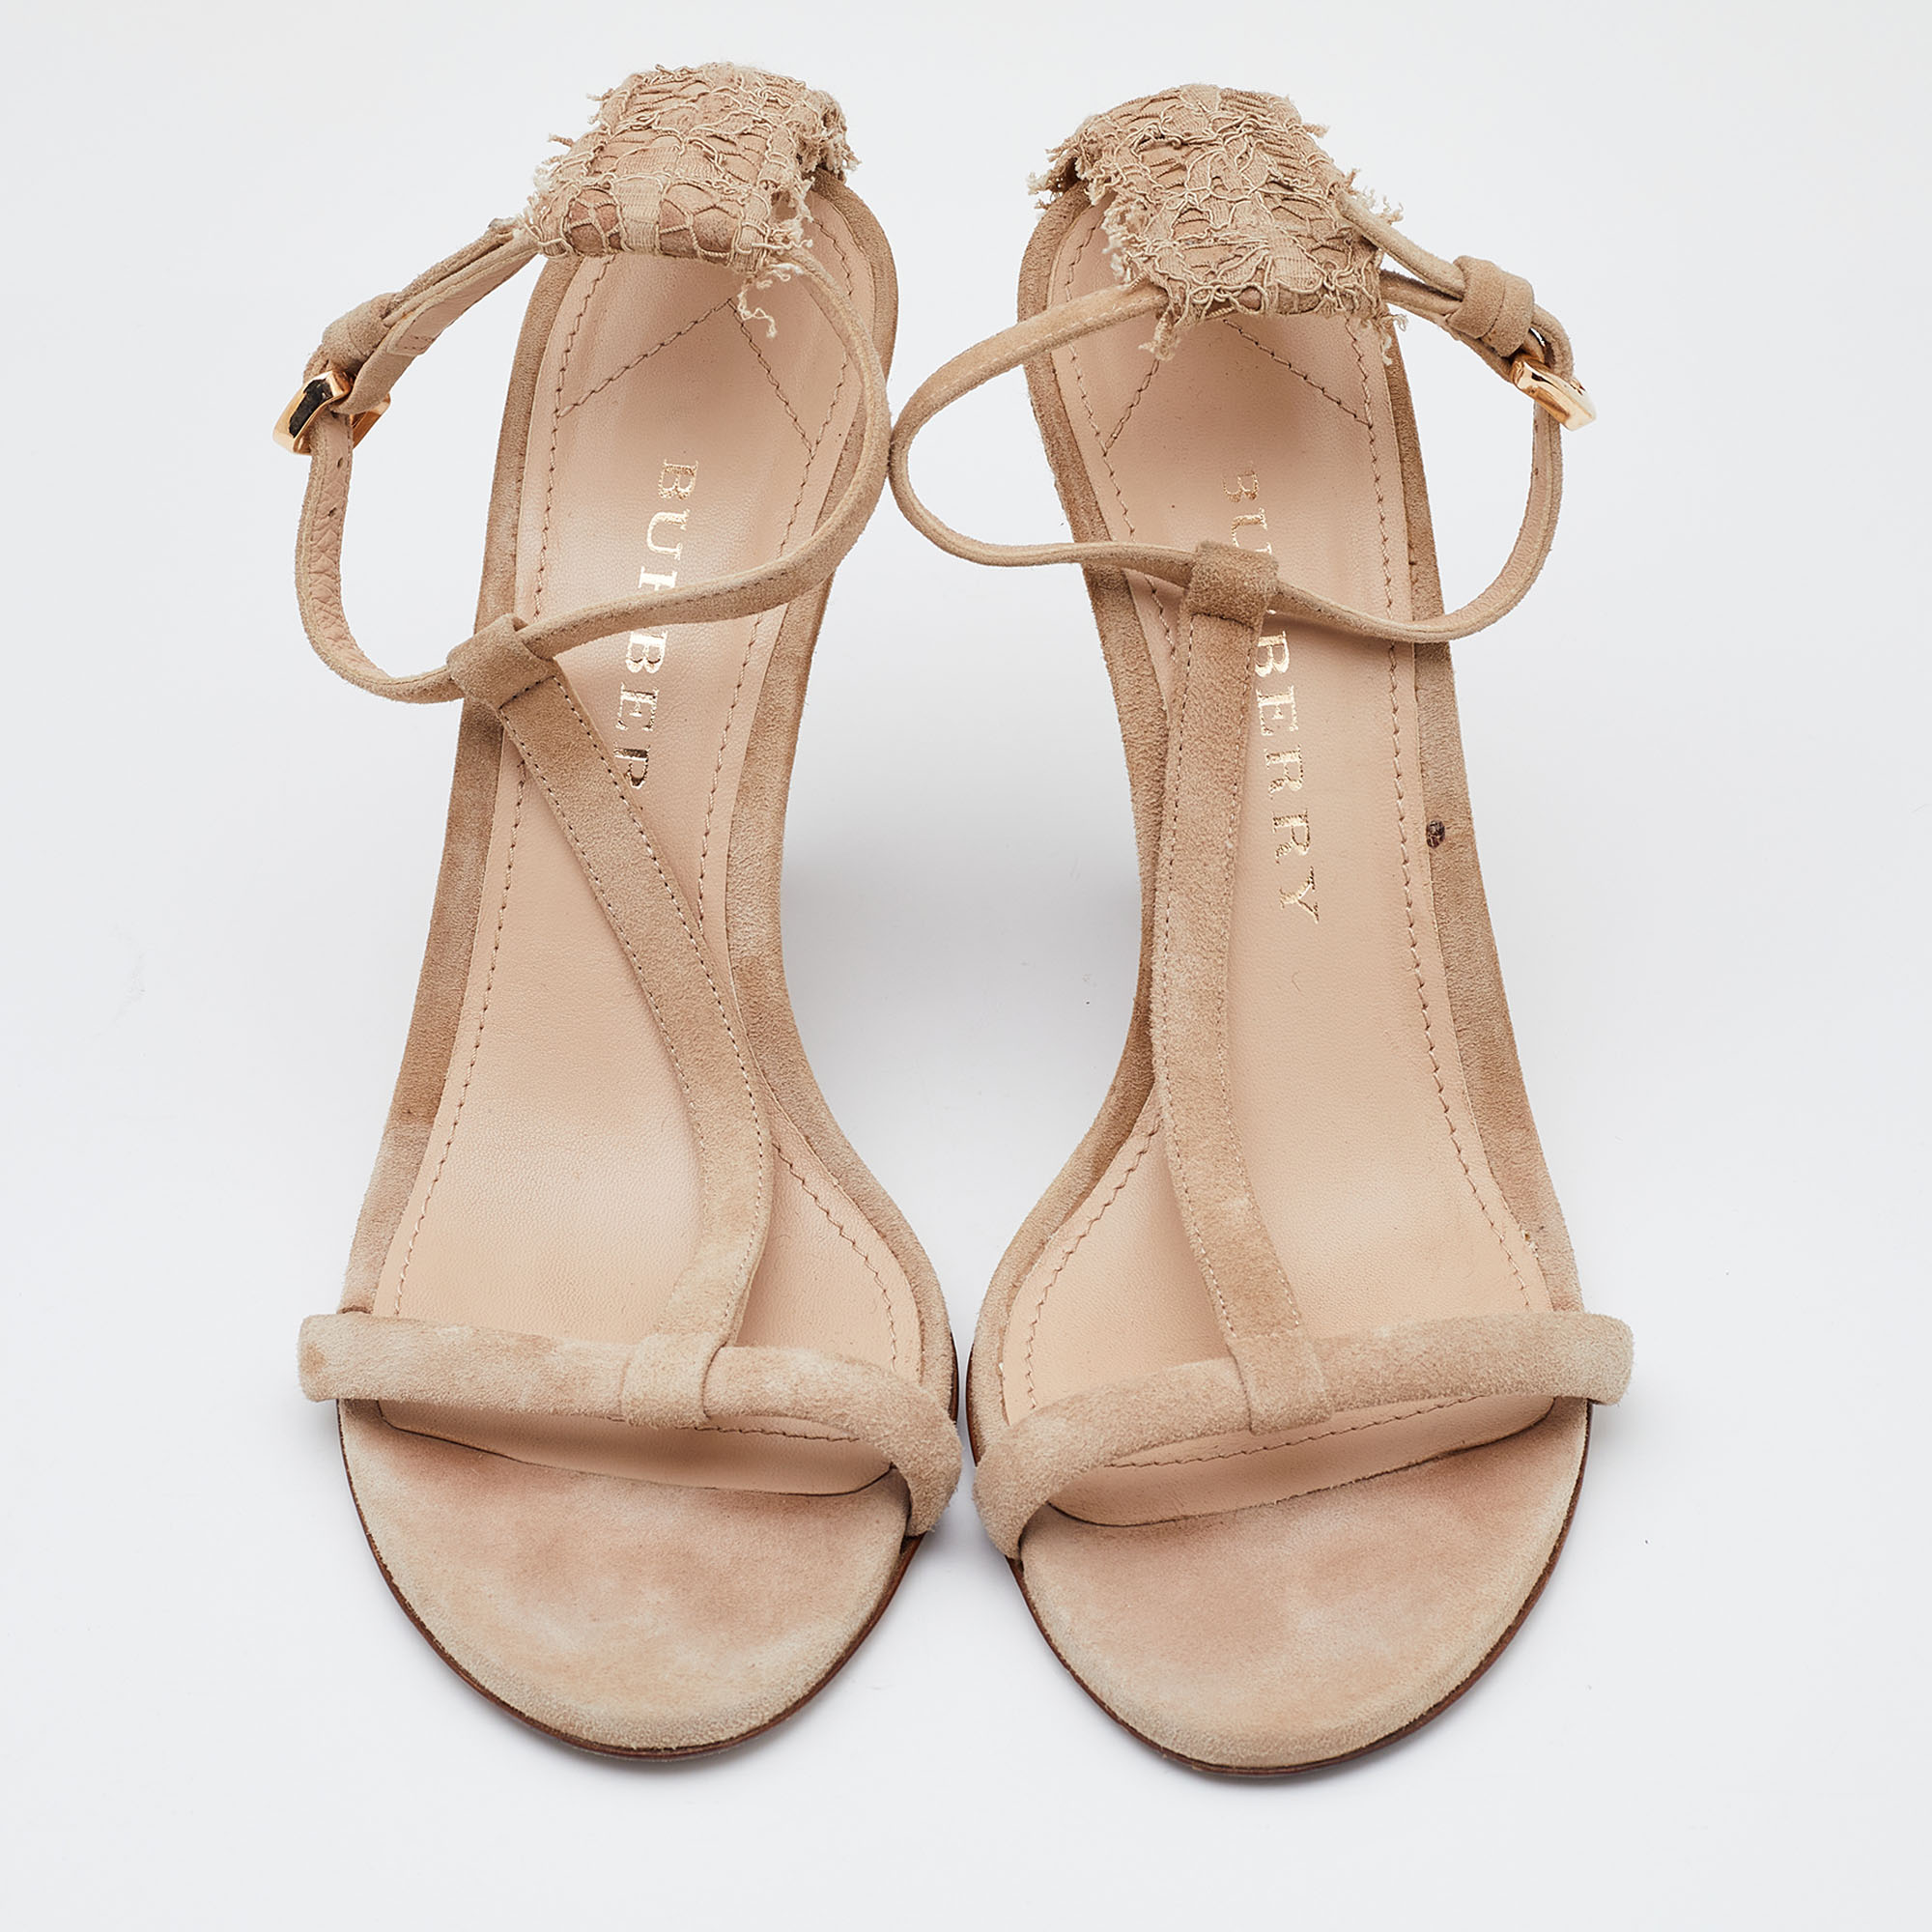 Burberry Beige Suede And Lace T Strap Wedge Sandals Size 38